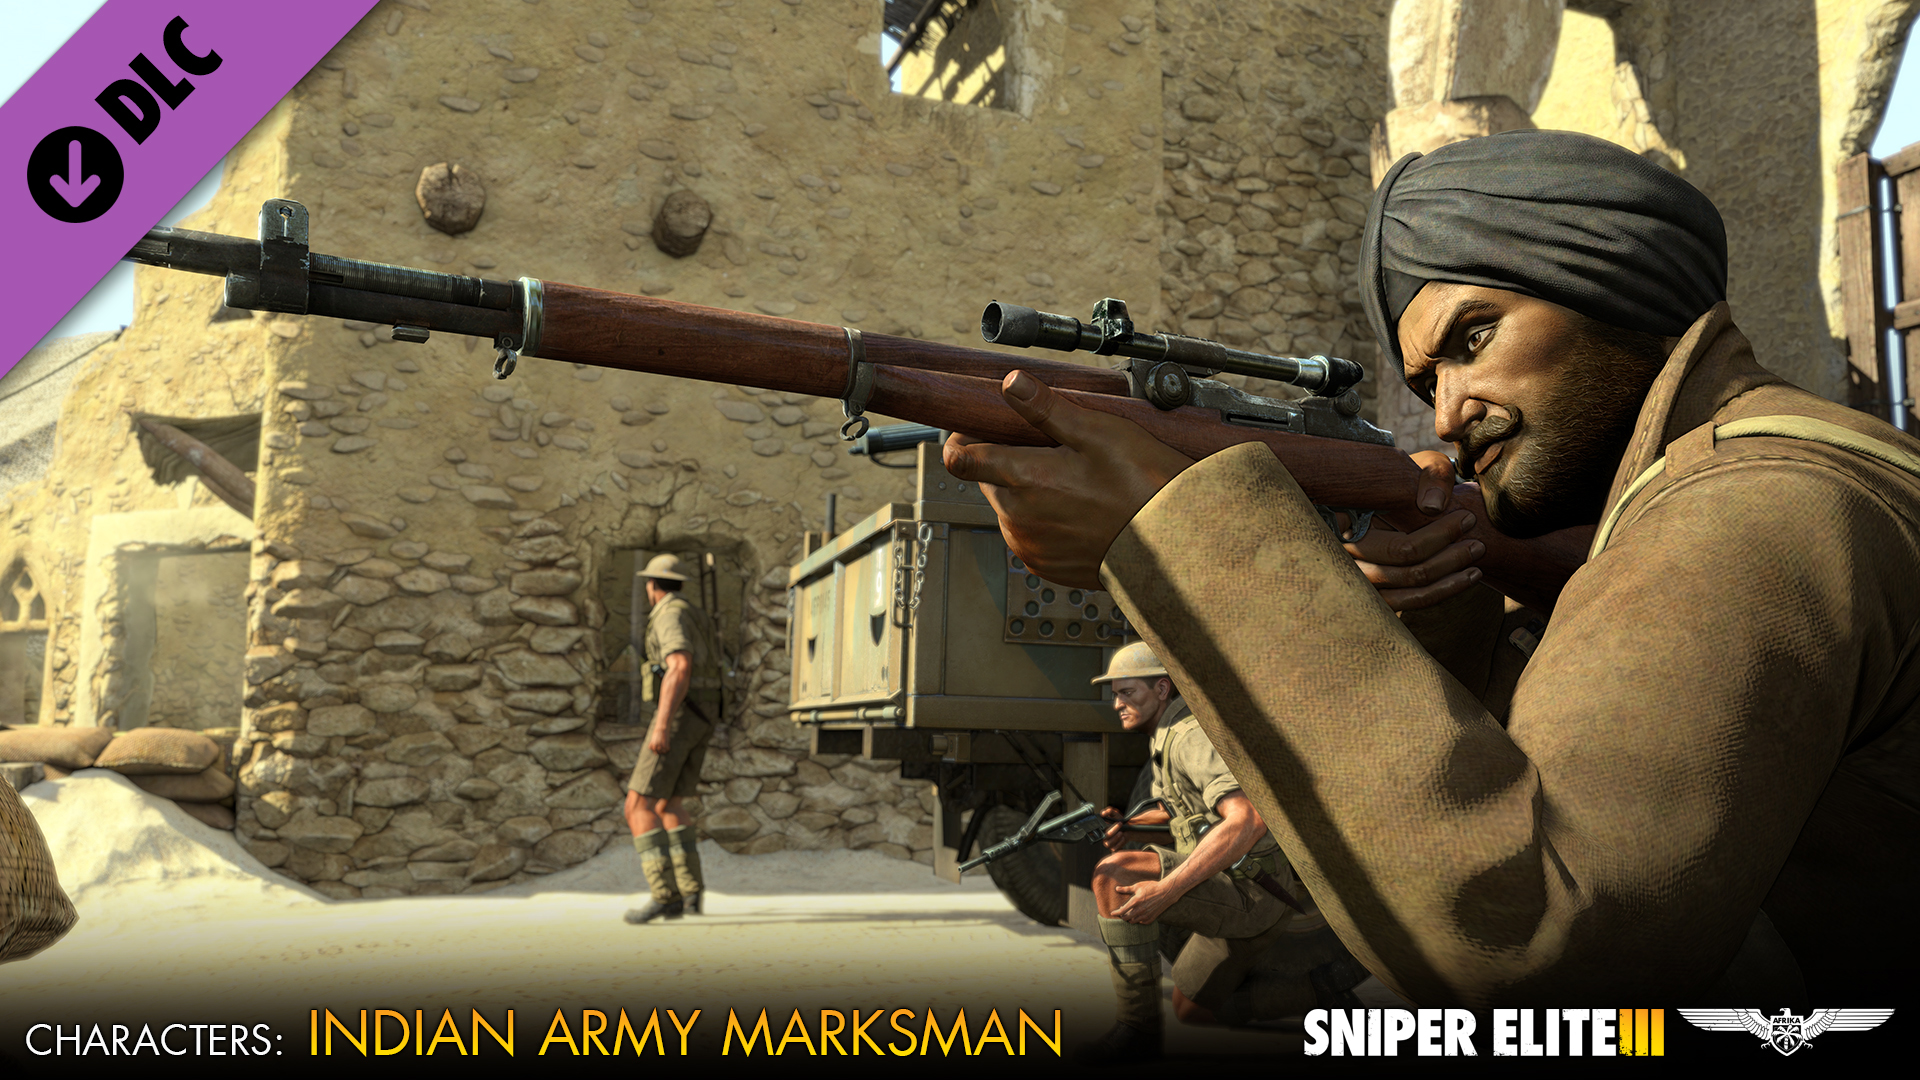 Sniper Elite 3 - Allied Reinforcements Outfit Pack screenshot